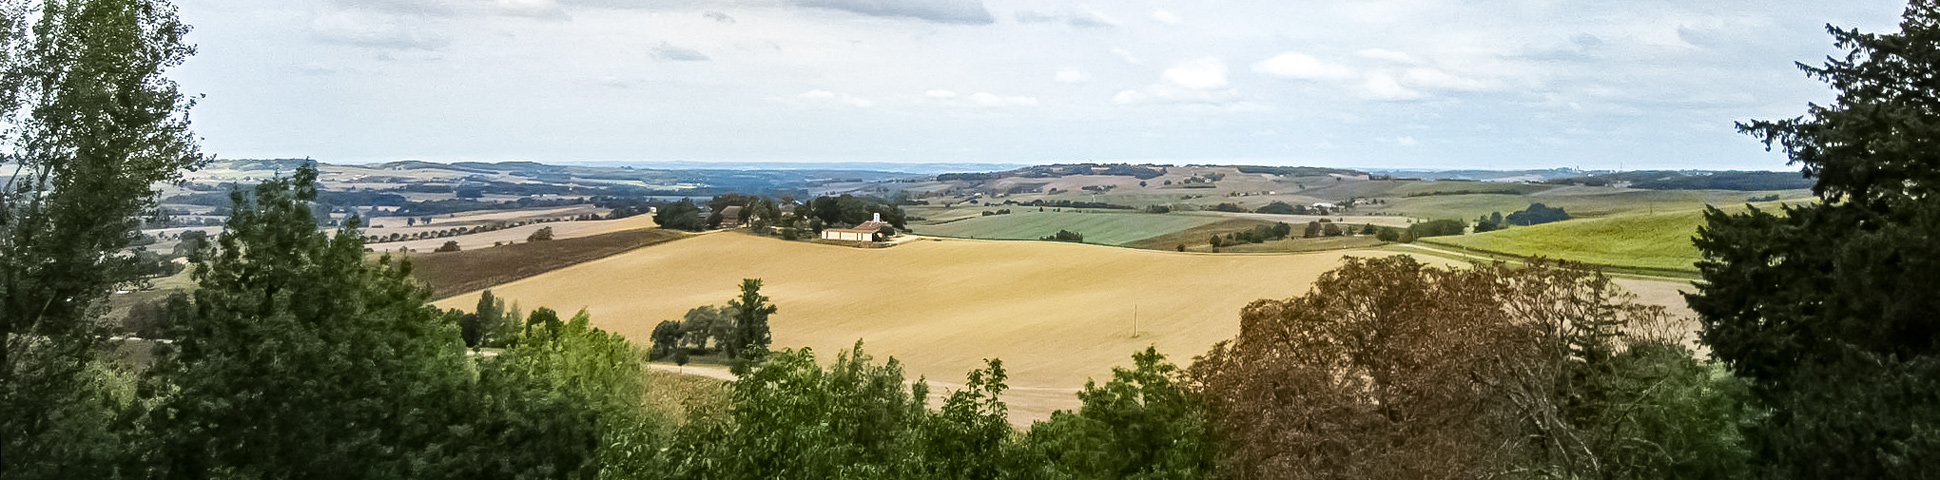 Panoramic views from Cycling the Last Week of the Camino Frances Tour